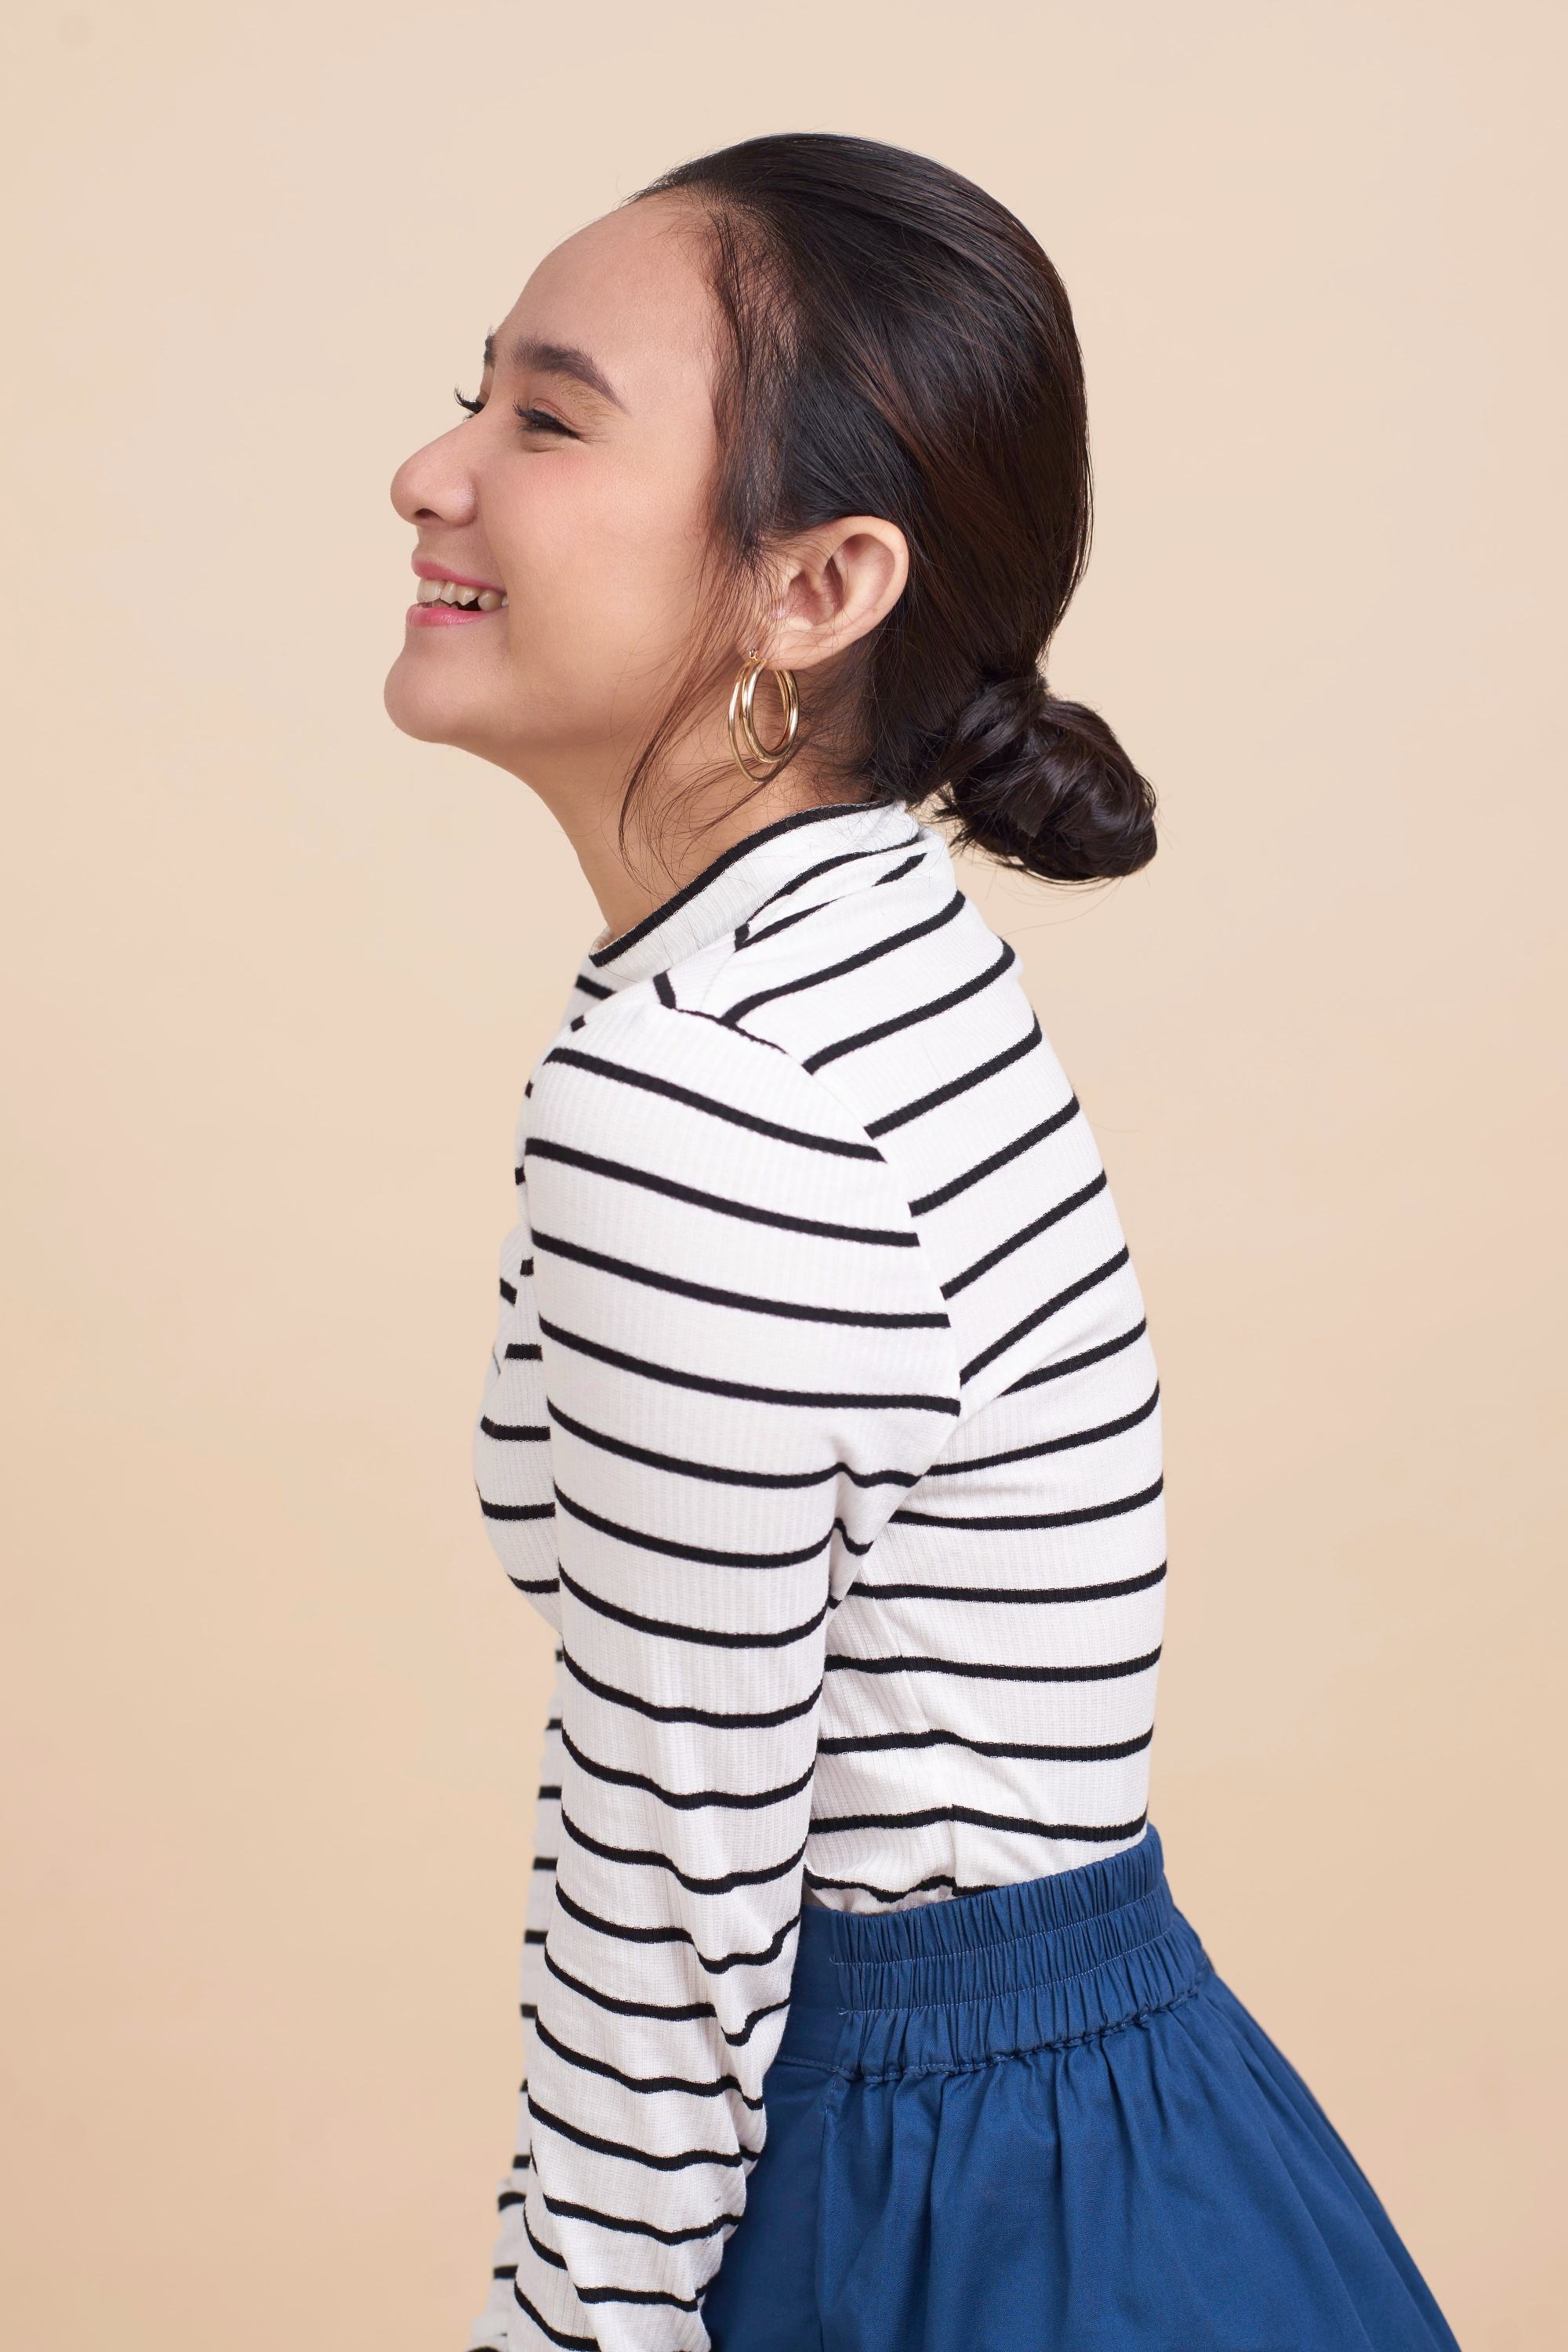 Side view of an Asian woman with a baby bun for short hair